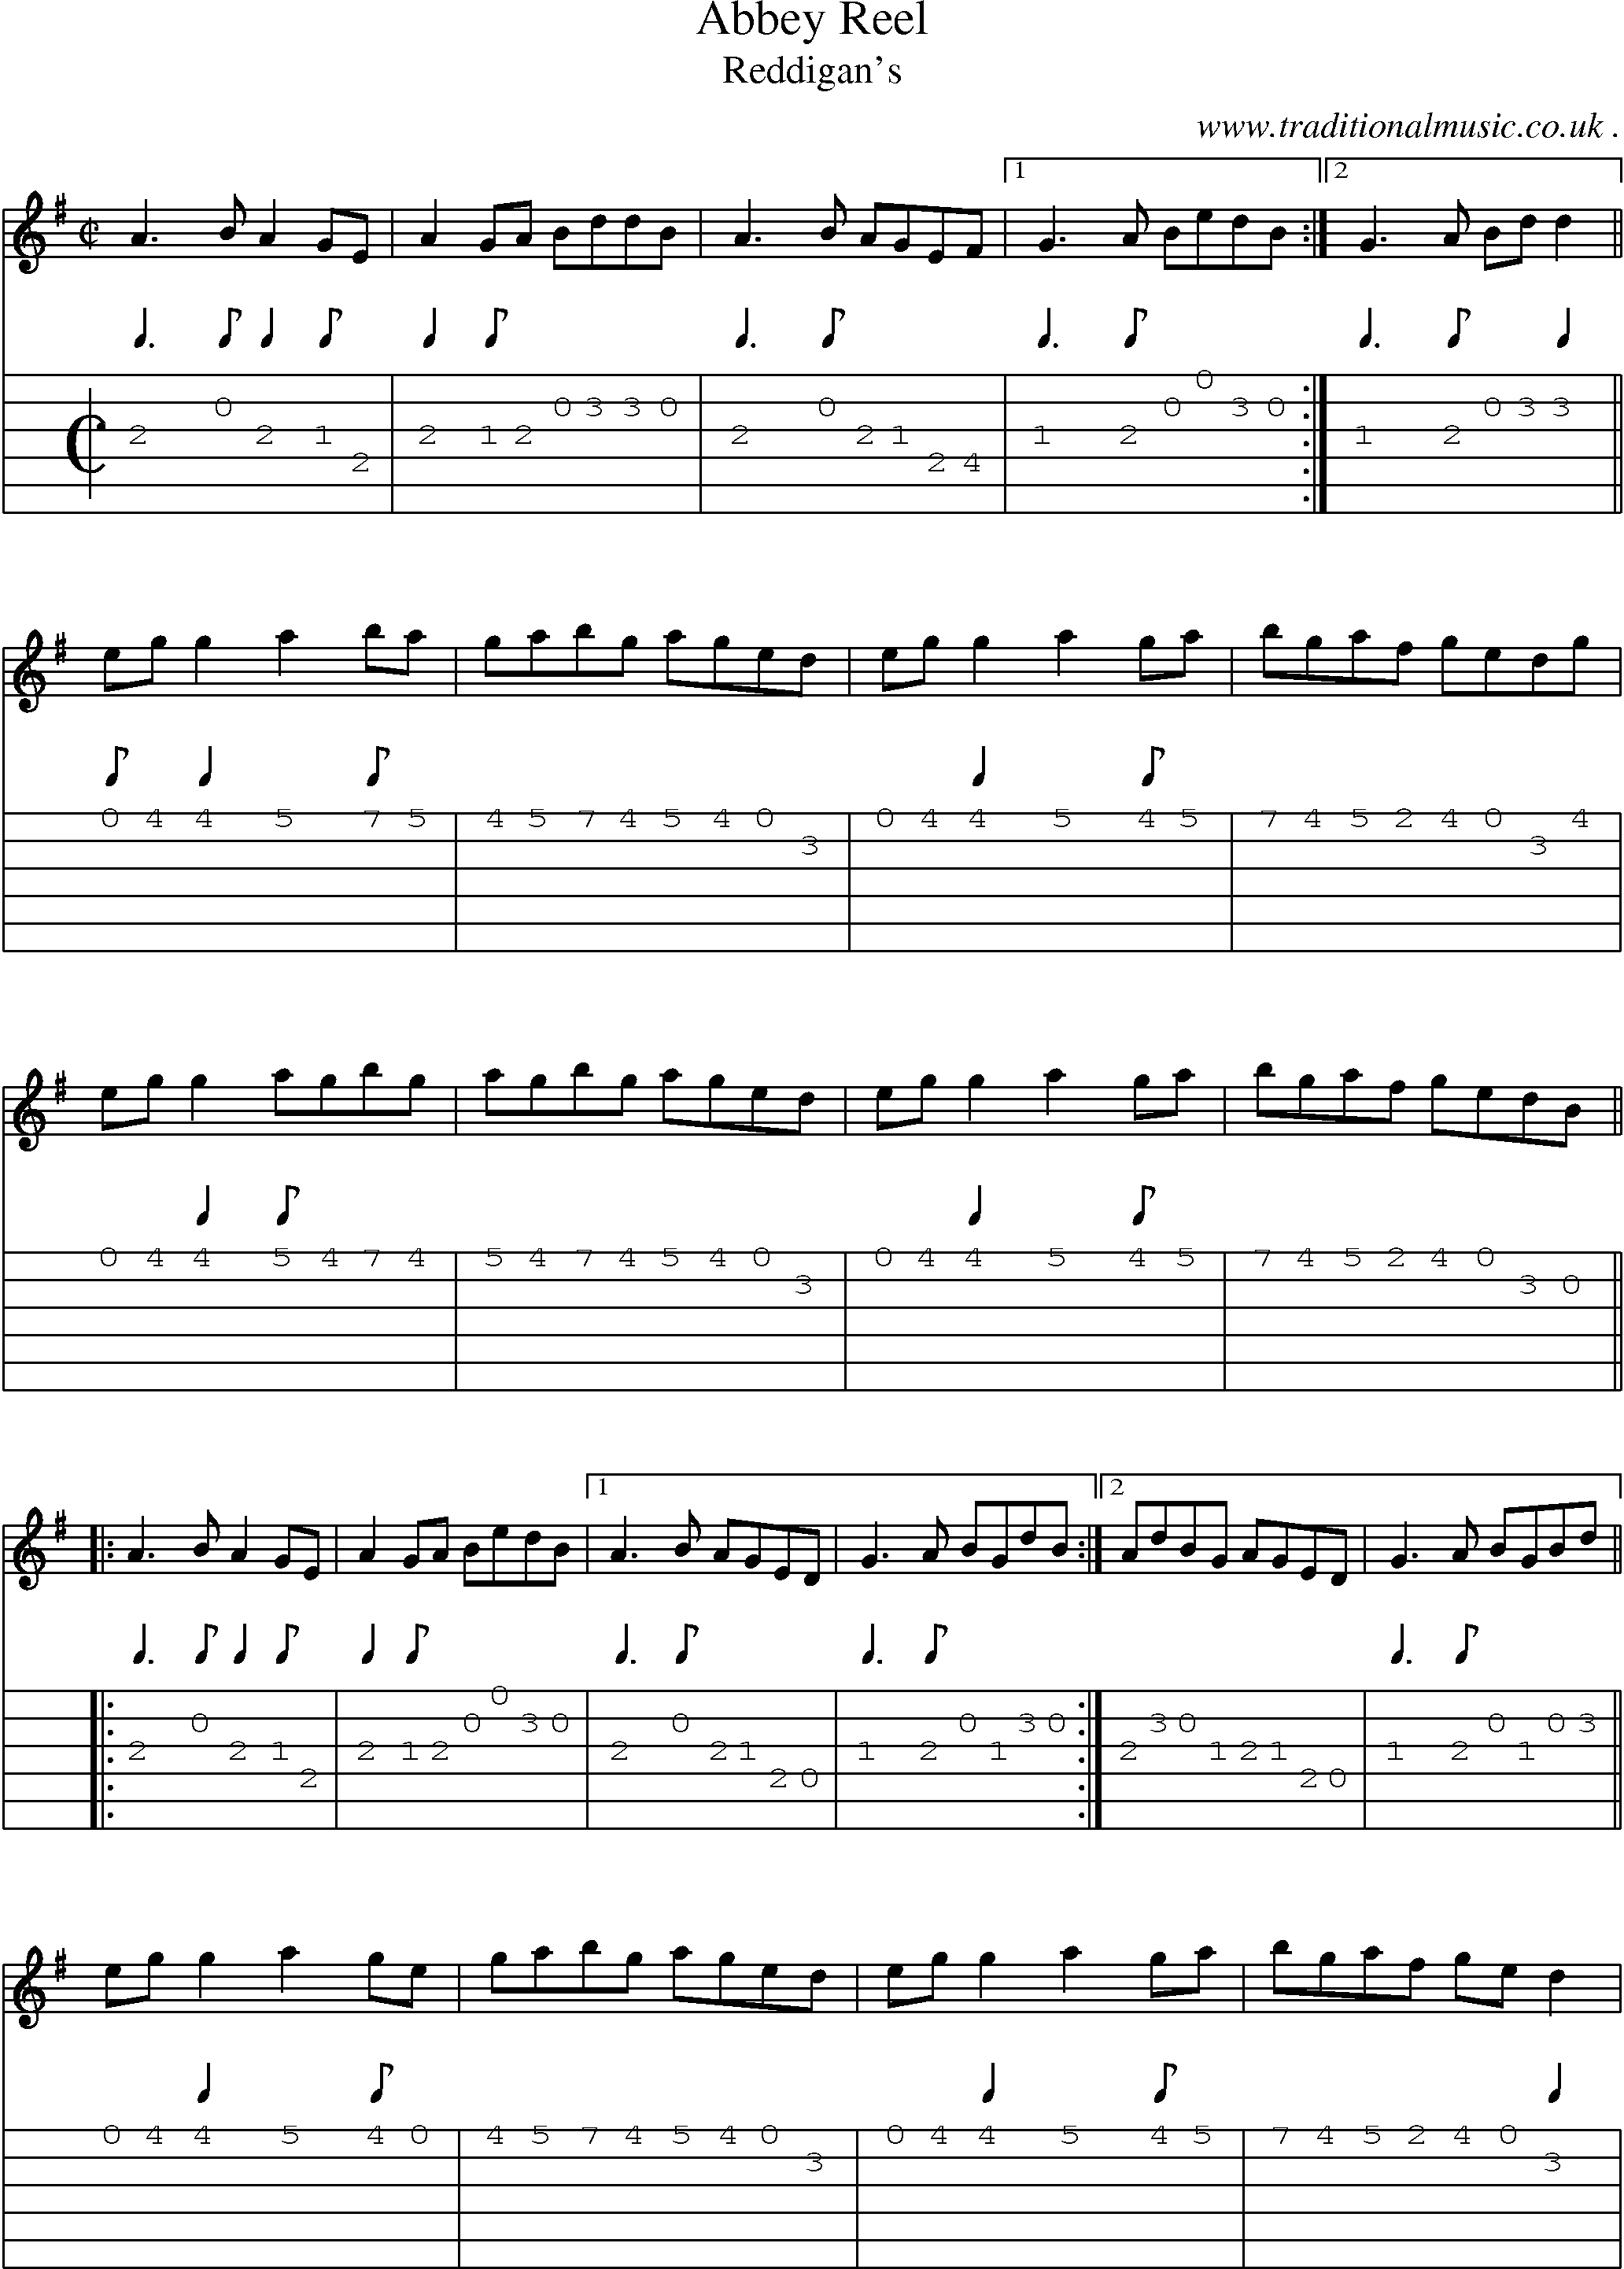 Sheet-Music and Guitar Tabs for Abbey Reel